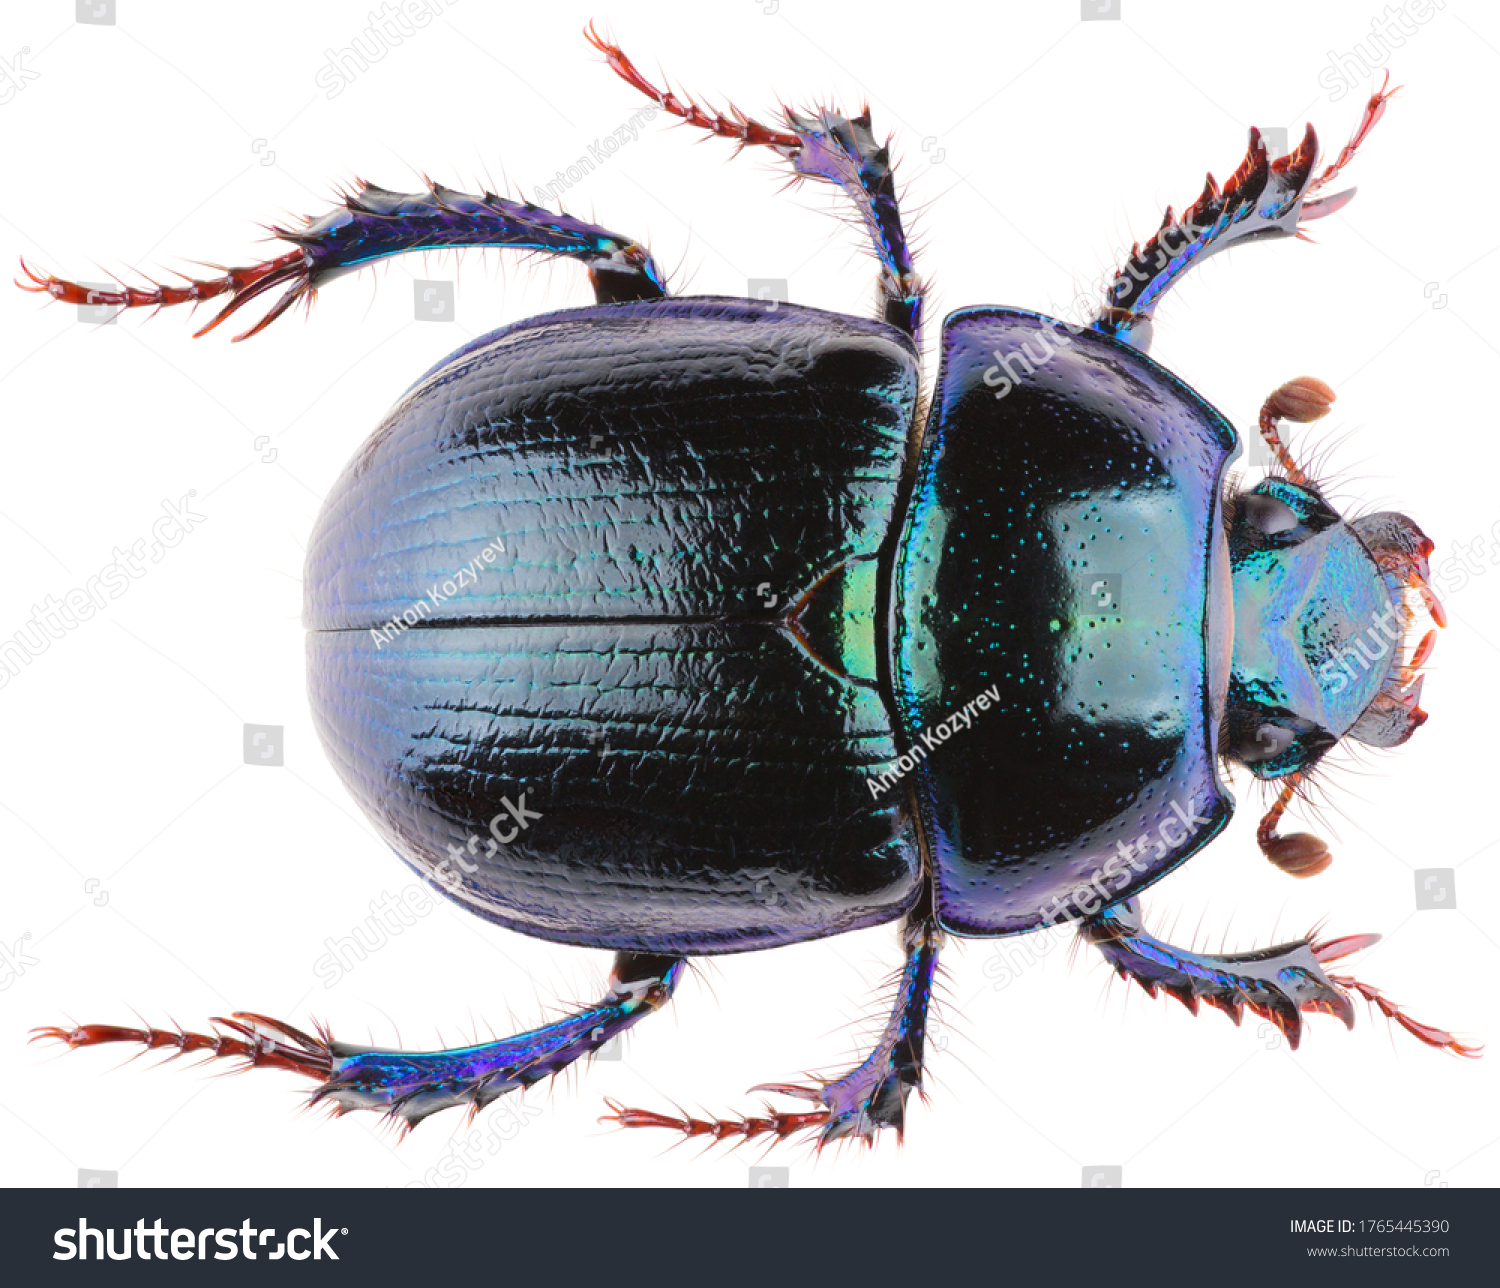 Anoplotrupes stercorosus dor beetle, is a species of earth-boring dung beetle belonging to the family Geotrupidae. Dorsal view of dung beetle Anoplotrupes stercorosus isolated on white background. #1765445390